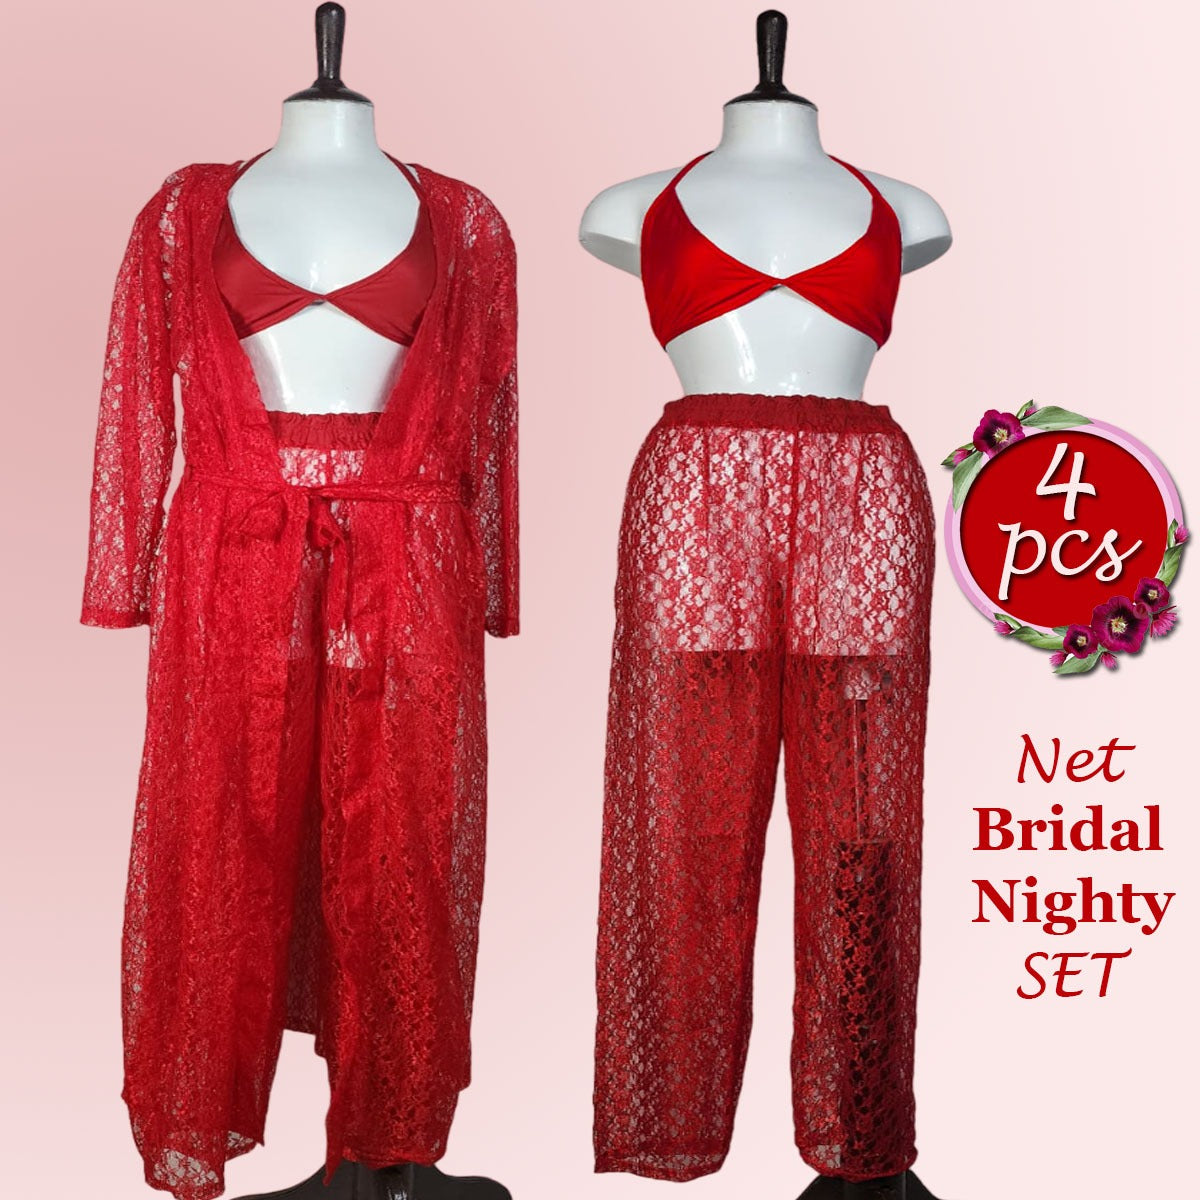 Ladies imported 4pcs High quality Lace Nighty Net See Bridal Set